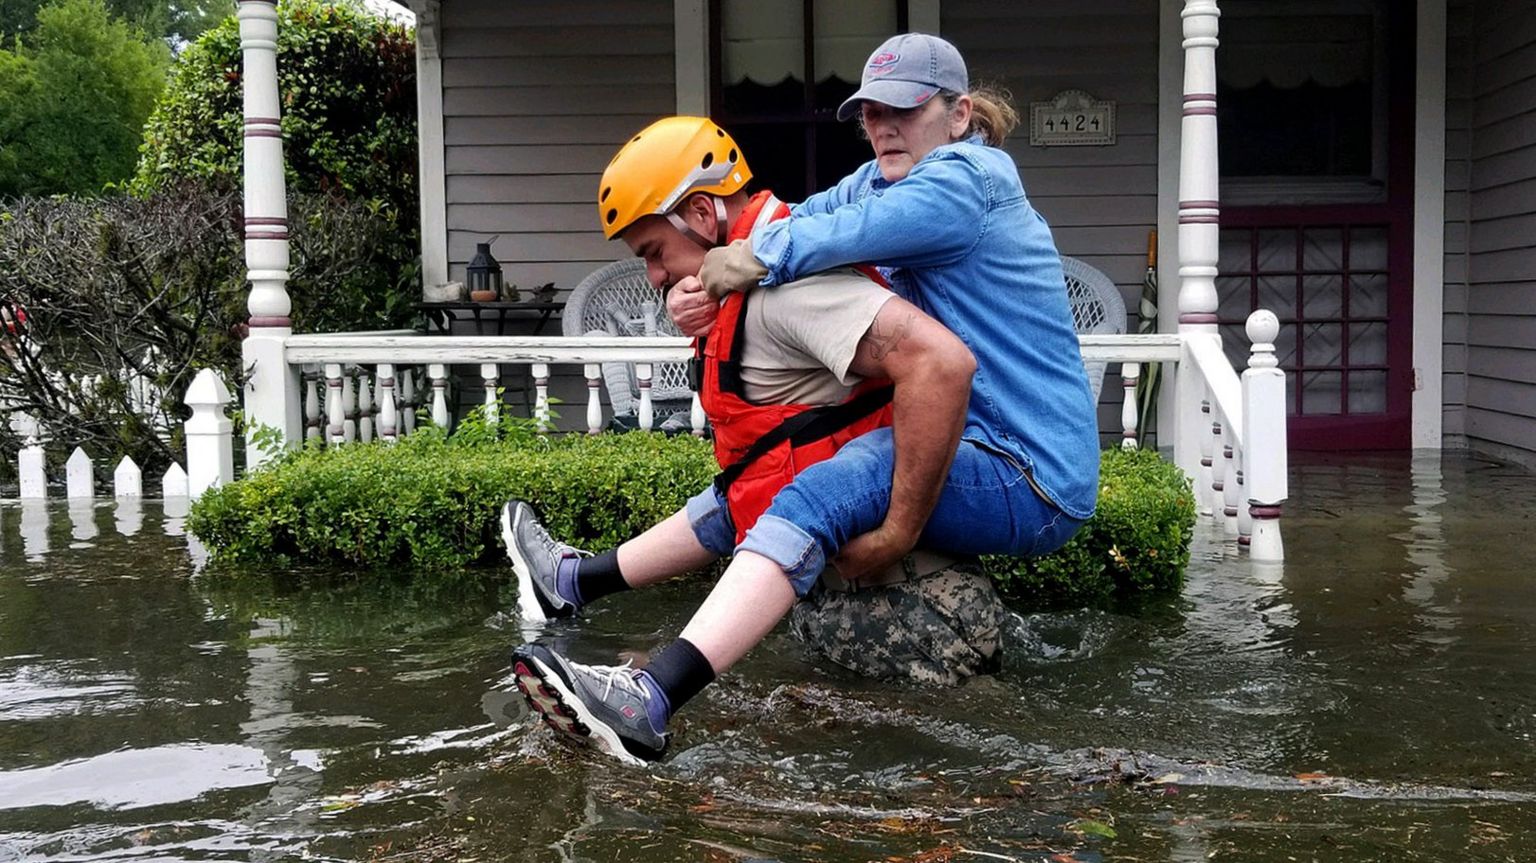 A woman is carried through flood waters on a man's back in Houston